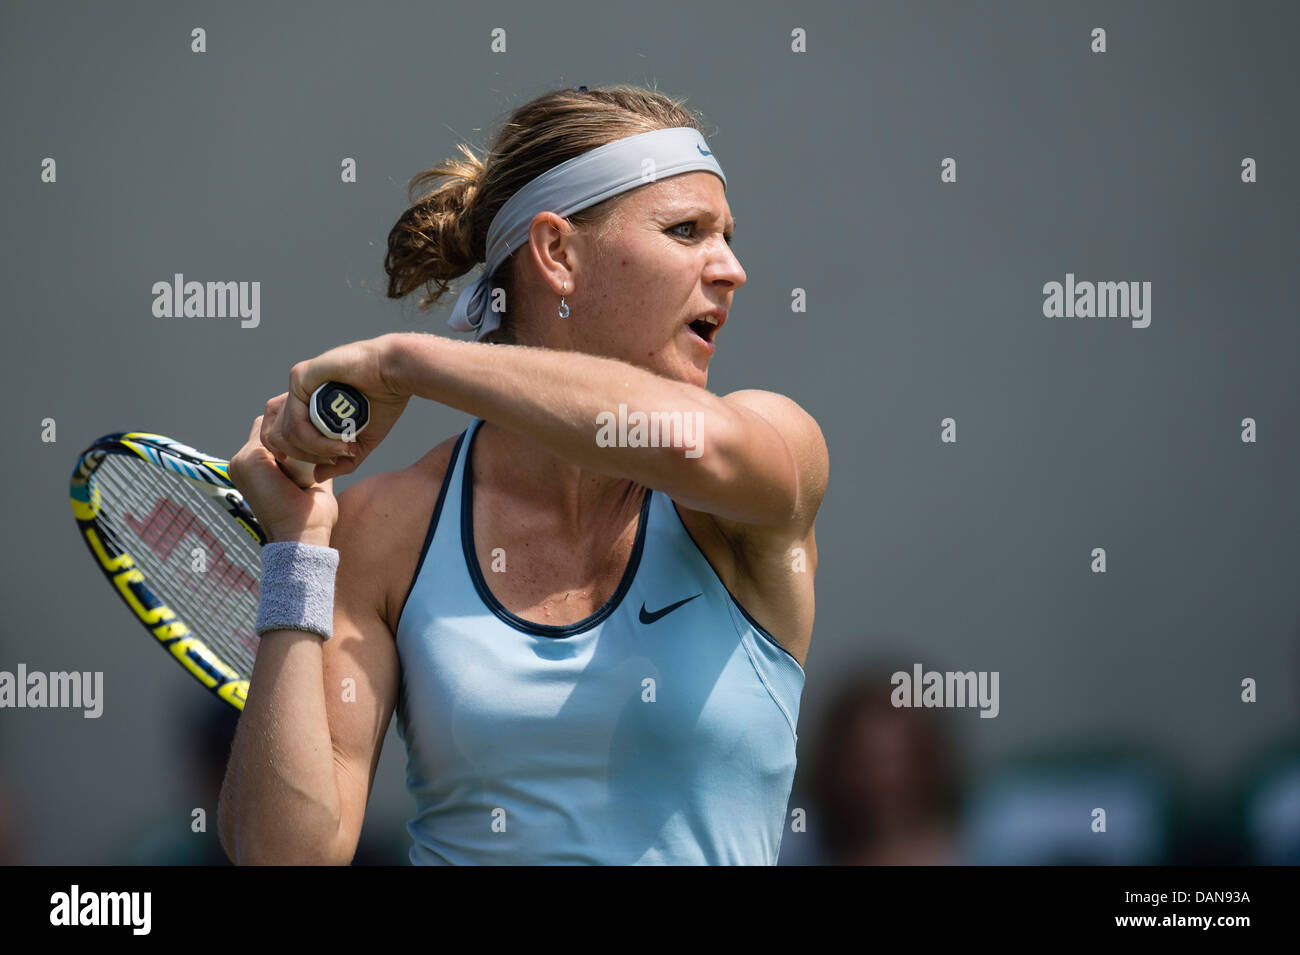 Lucie Safarova of Czech Republic in action playing two handed backhand shot Stock Photo